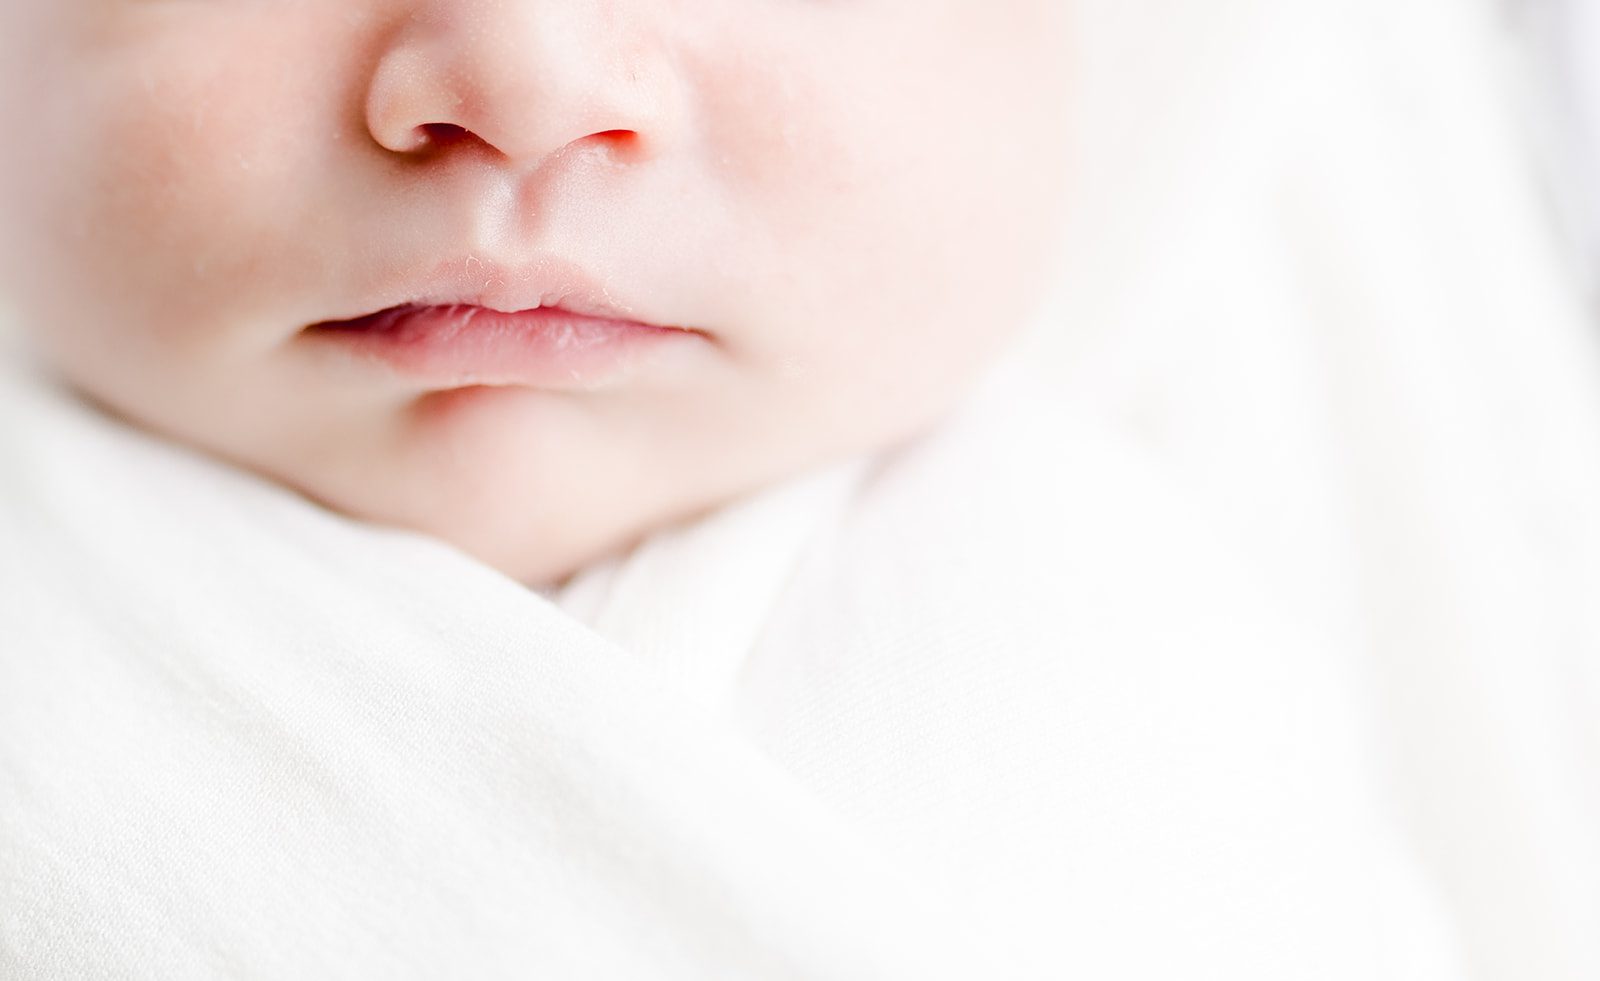 Detail shot of a newborn baby's lips and nose by northern virginia newborn photographer